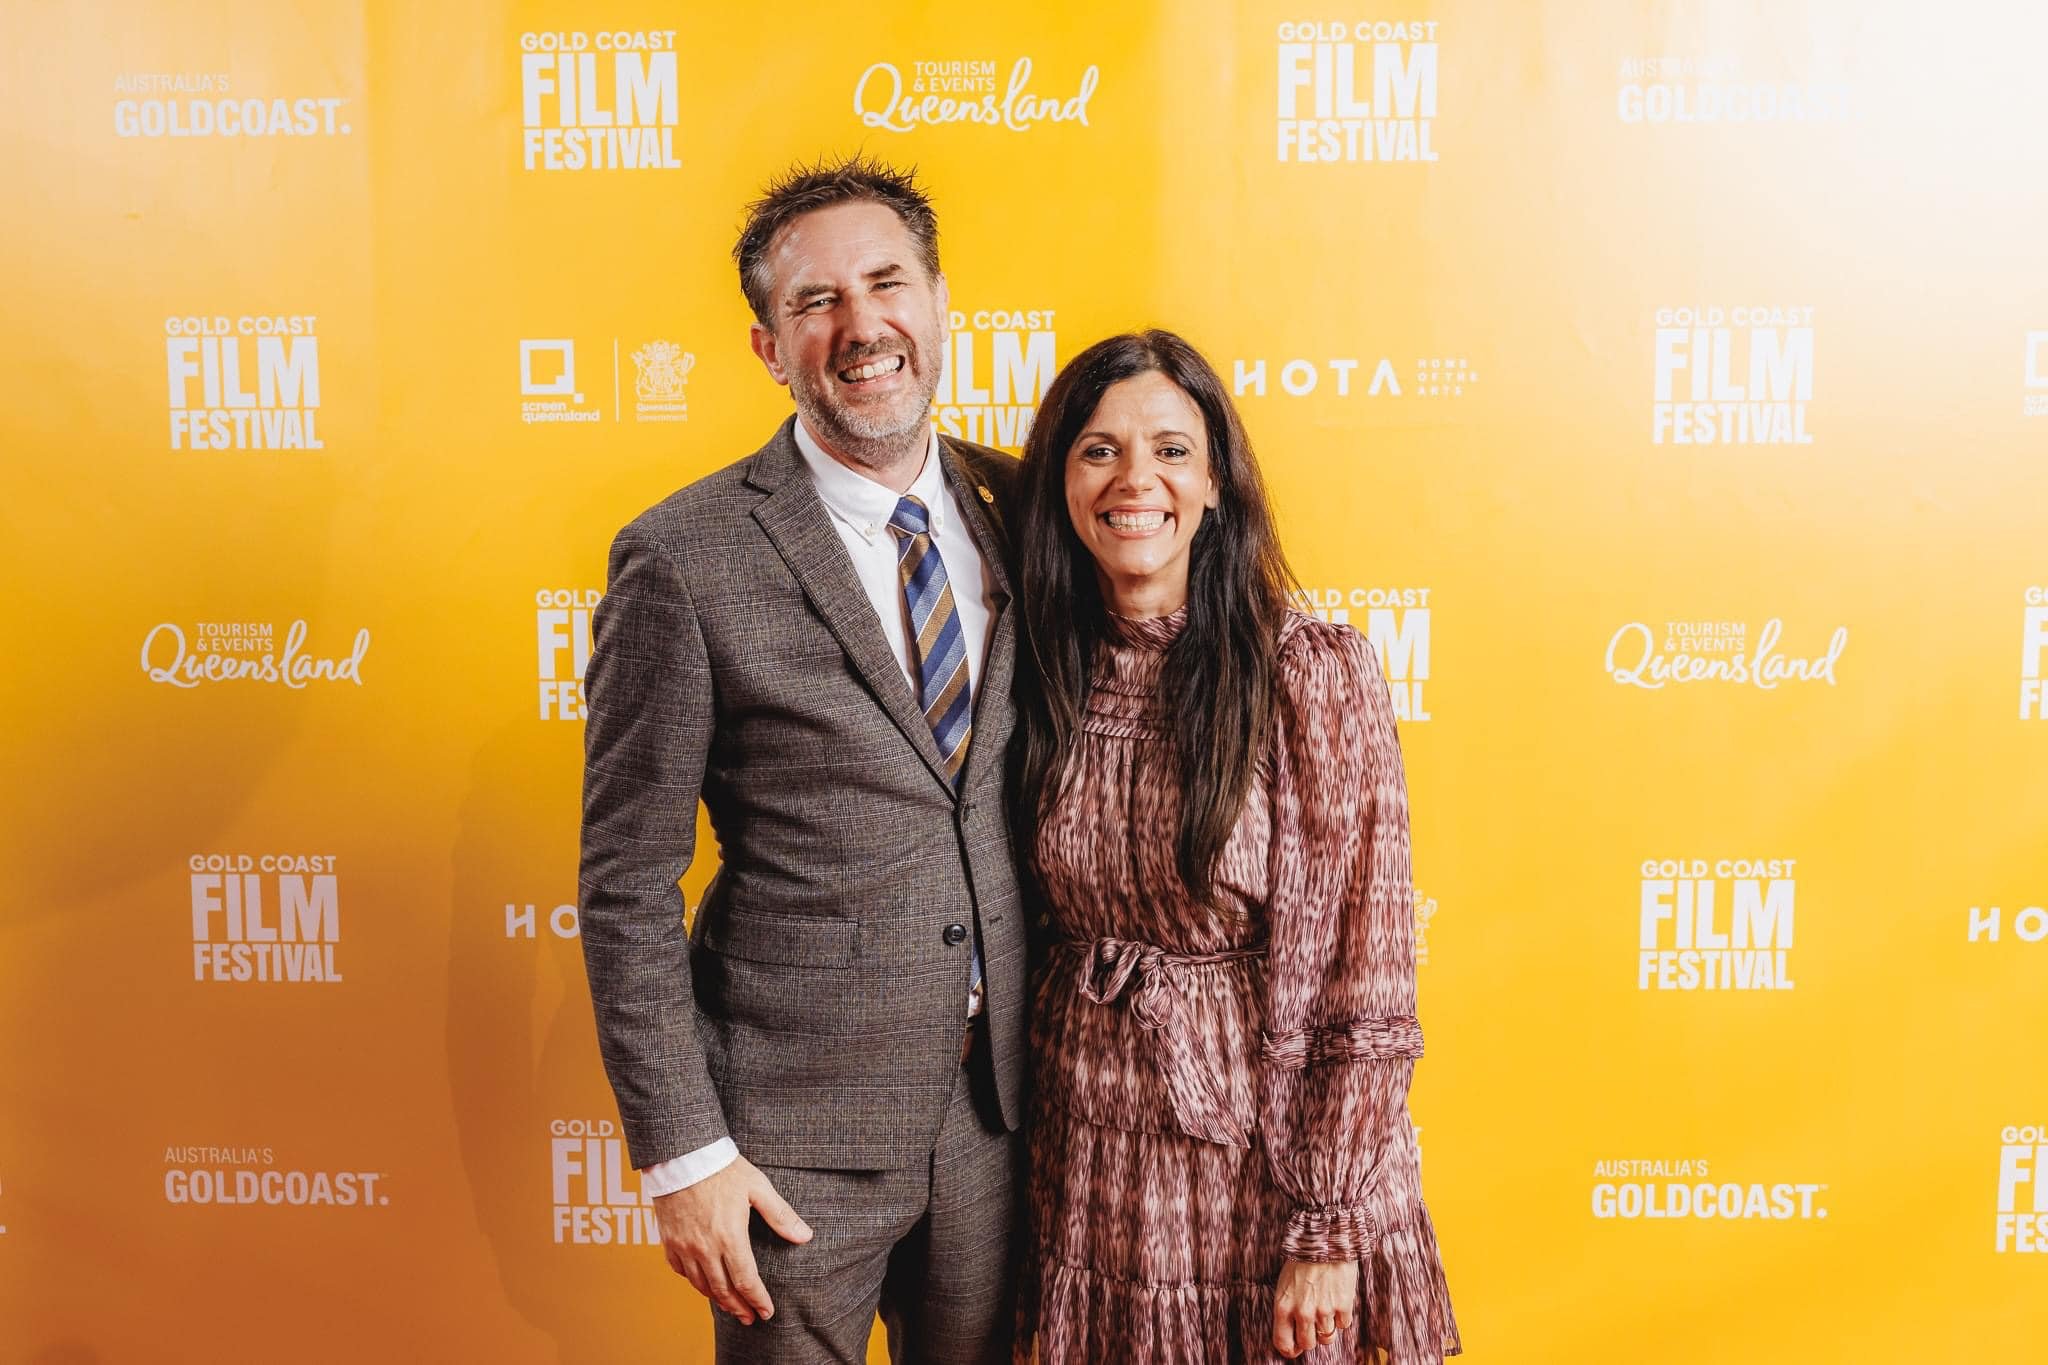 Had a bit of fun at Gold Coast Film Festival opening night yesterday. Jude looks smashing too. ❤️